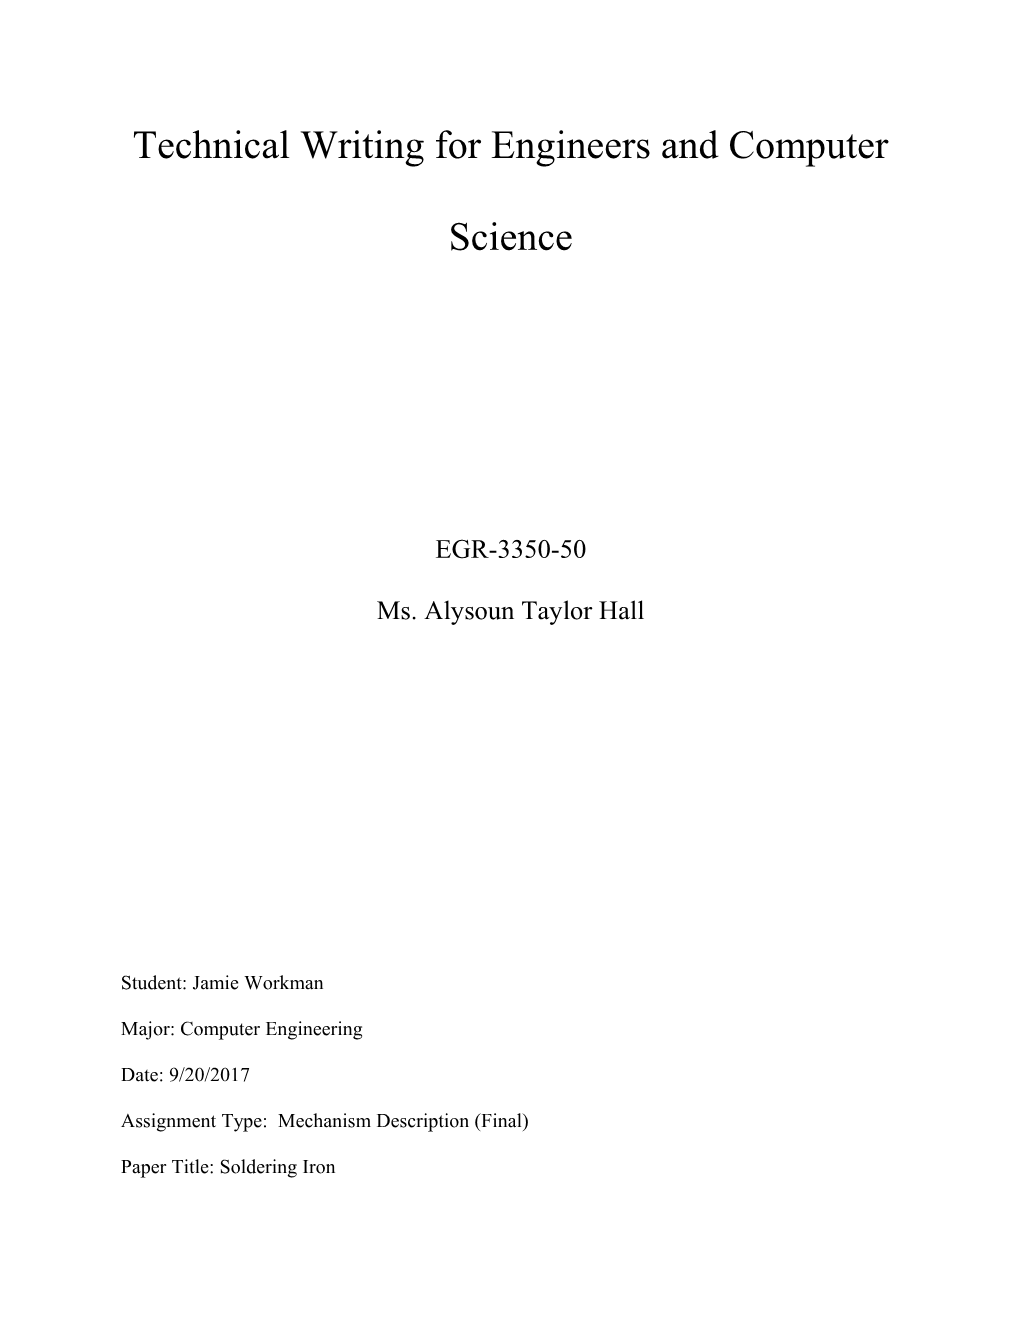 Technical Writing for Engineers and Computer Science